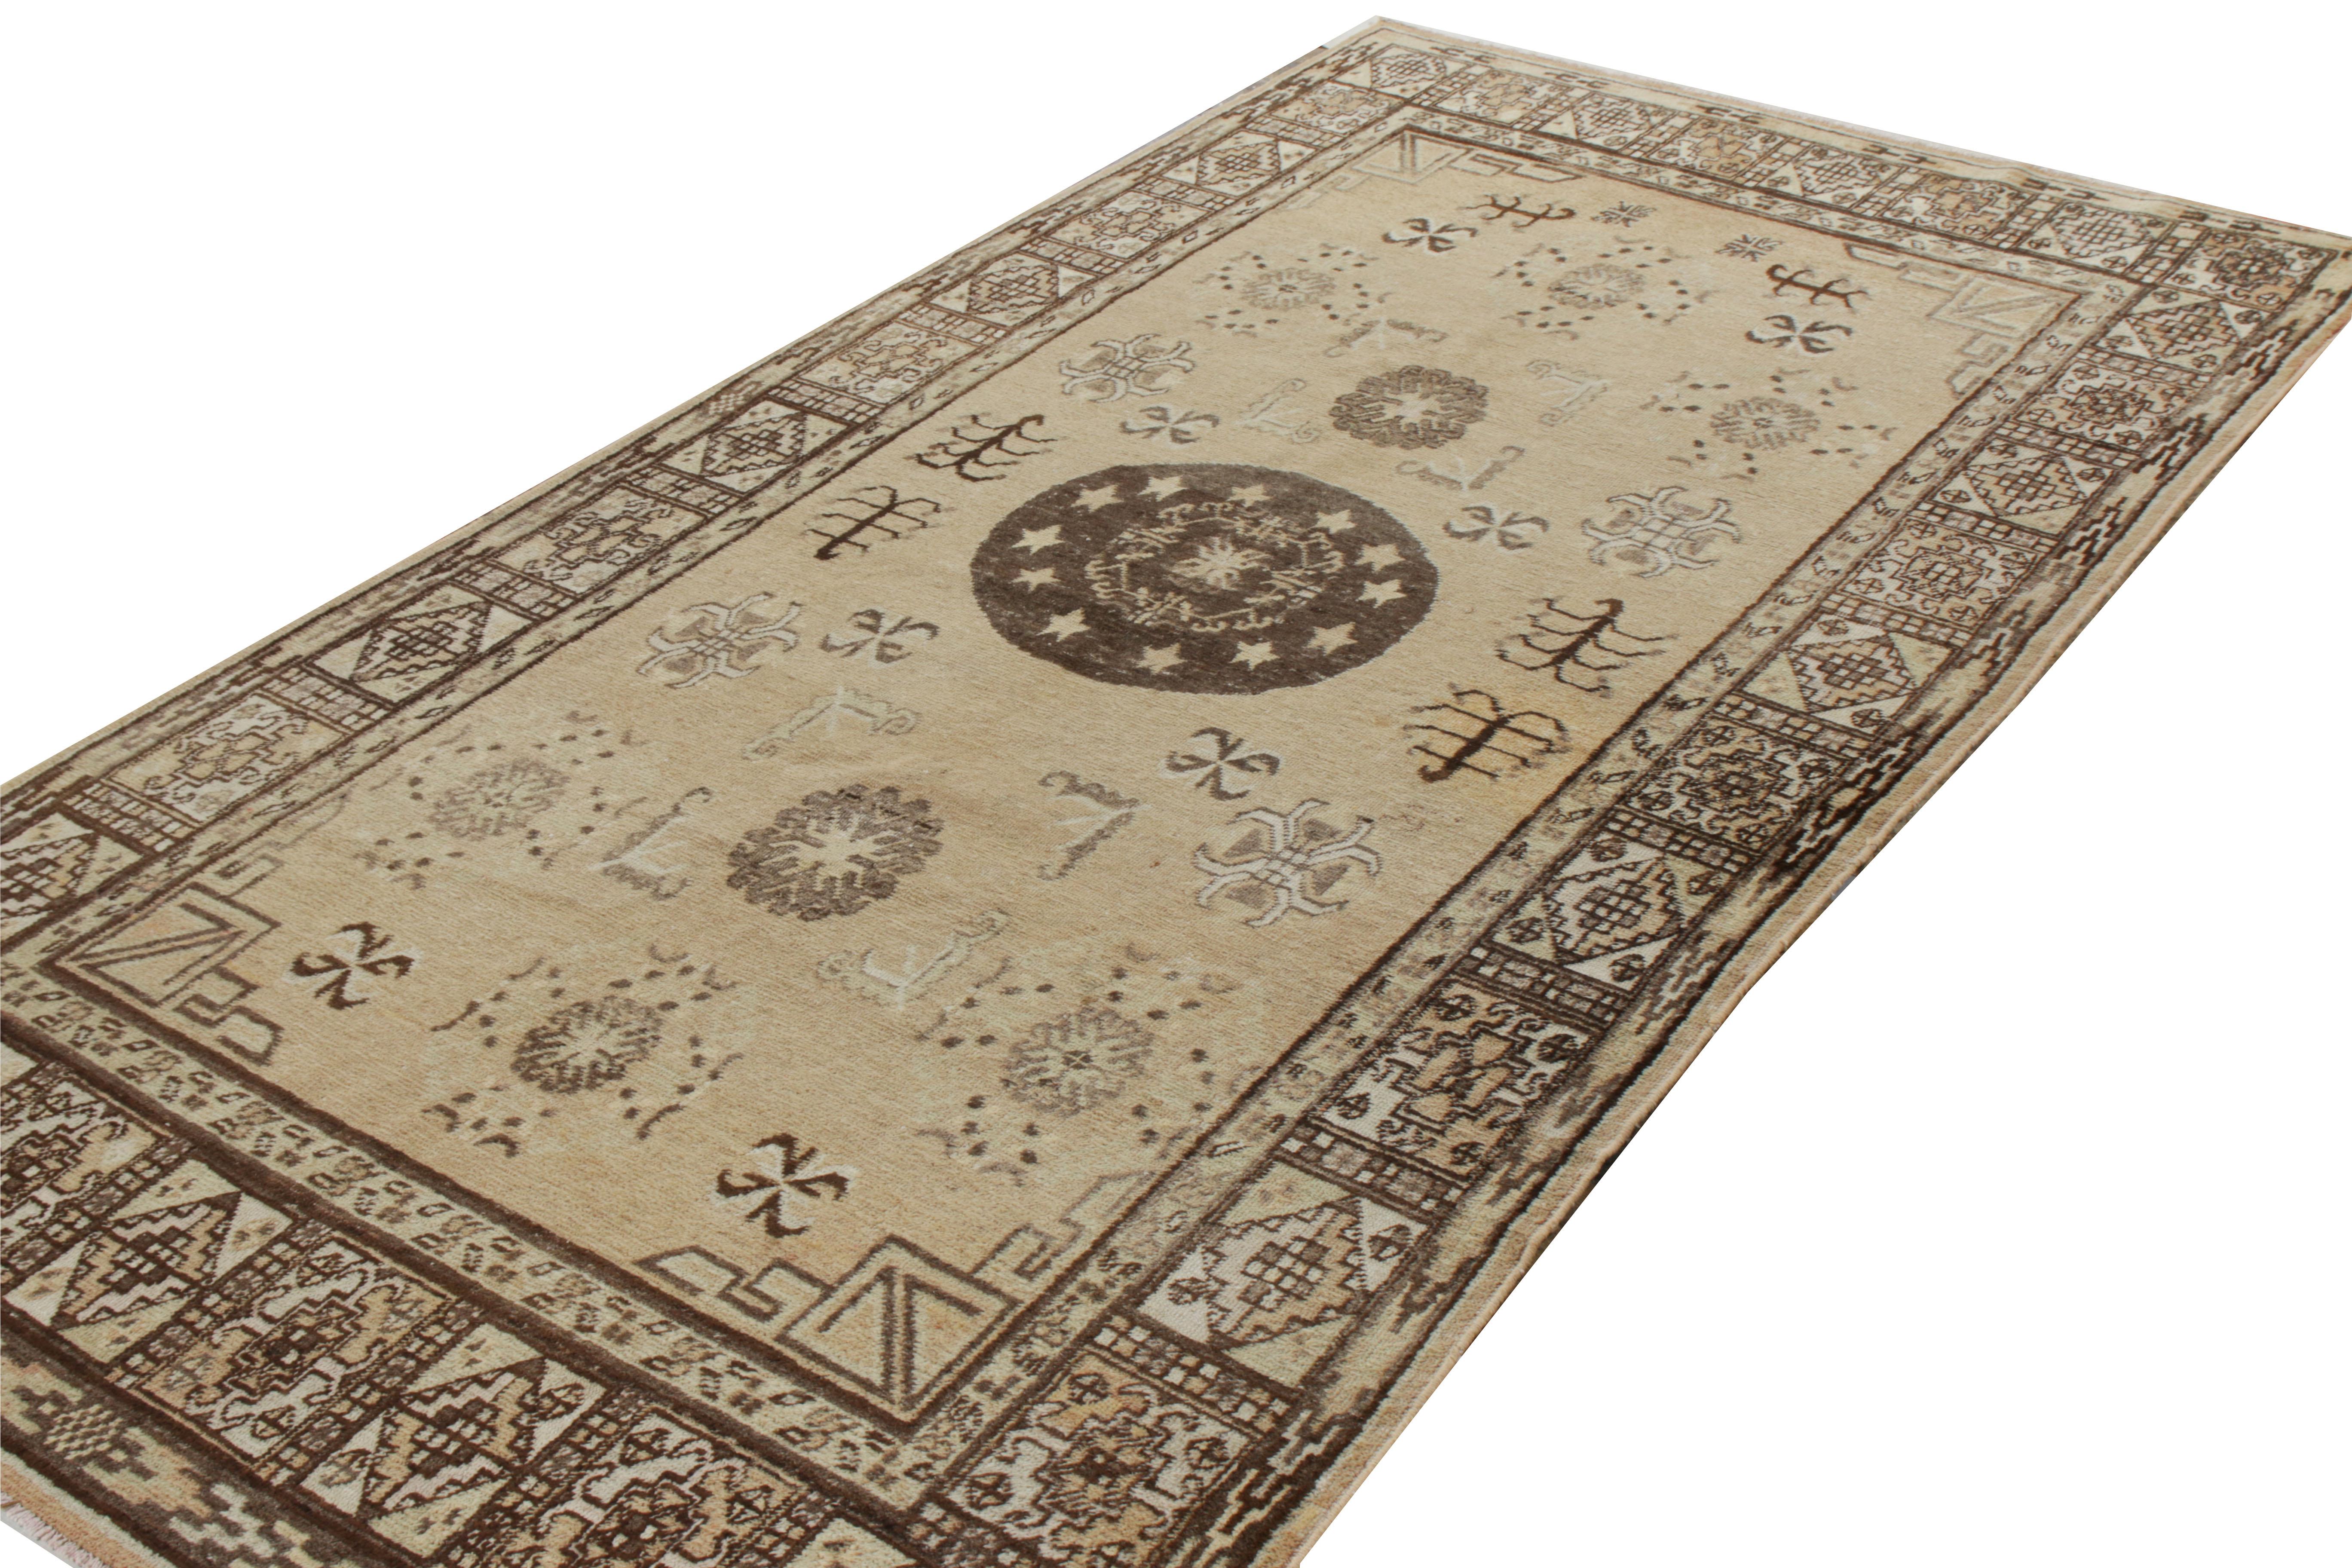 Originating from Turkestan circa 1920-1930, this antique Khotan rug s a features a medallion pattern that stands secured in an all over geometric design accompanied with elegant flowers scattered on the scale. The 6x11 masterpiece revels on a